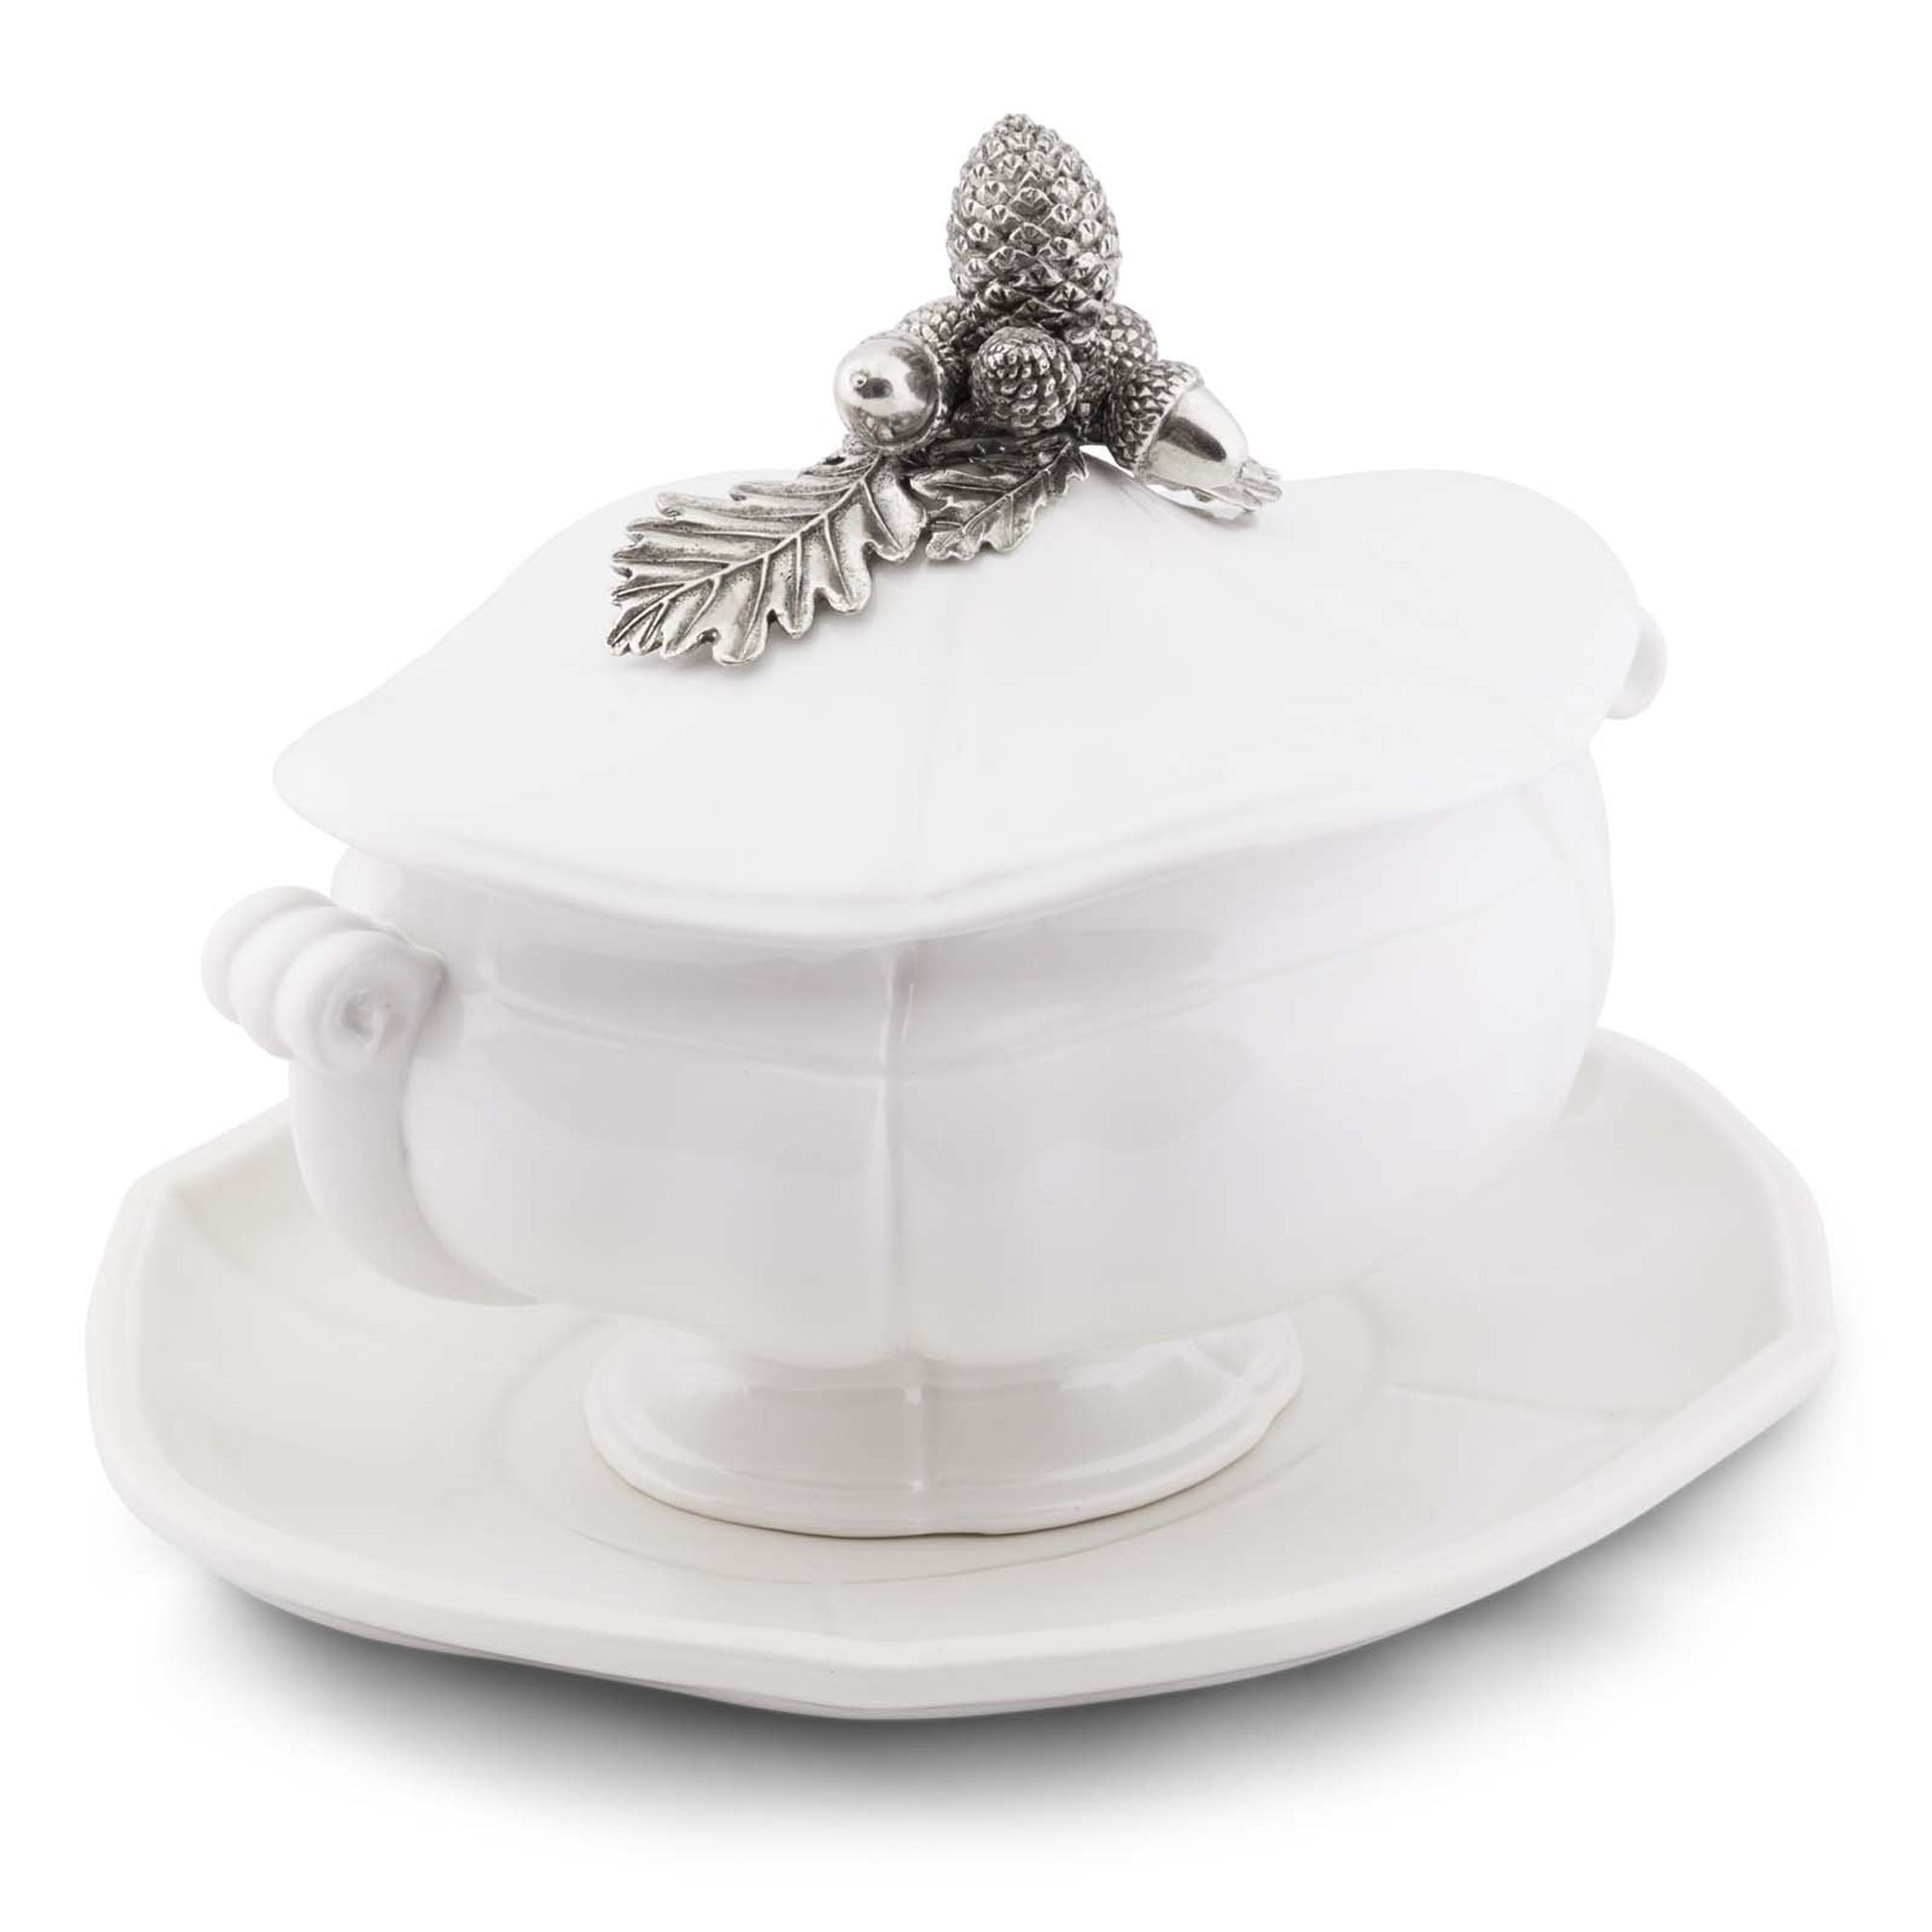 Vagabond House Majestic Forest Tureen Product Image